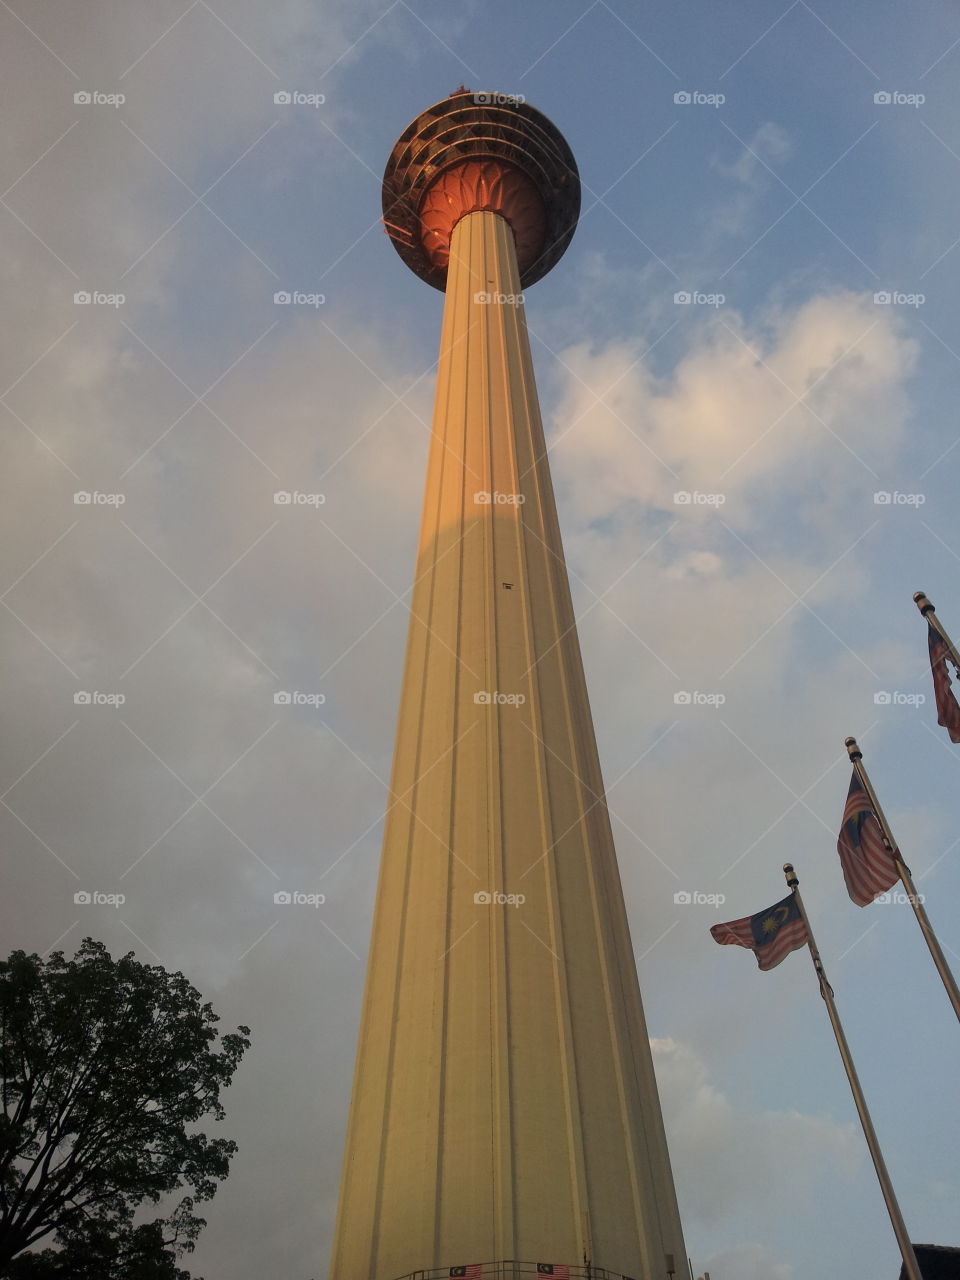 The KL Tower. The KL Tower in Kaula Lumpur-Malaysia